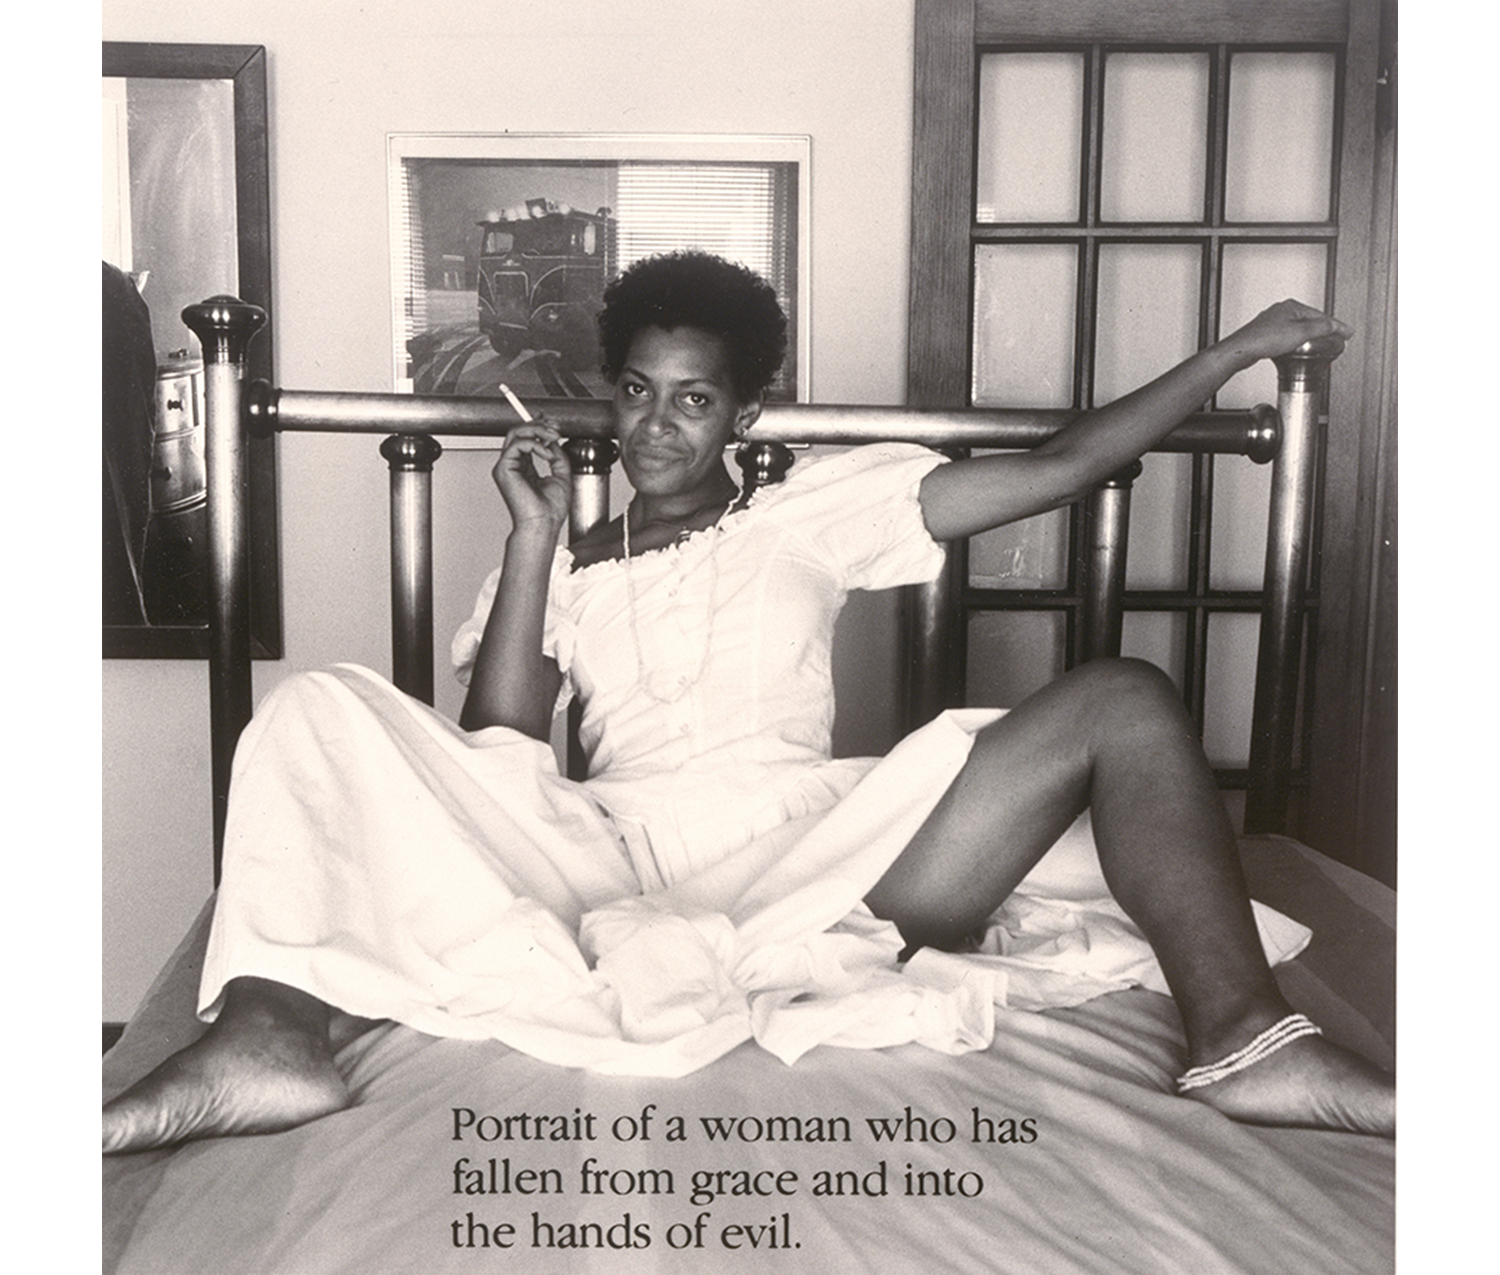 Black woman seated on bed with her legs spread, wearing a white dress and smoking a cigarette; gaze is focused at the camera